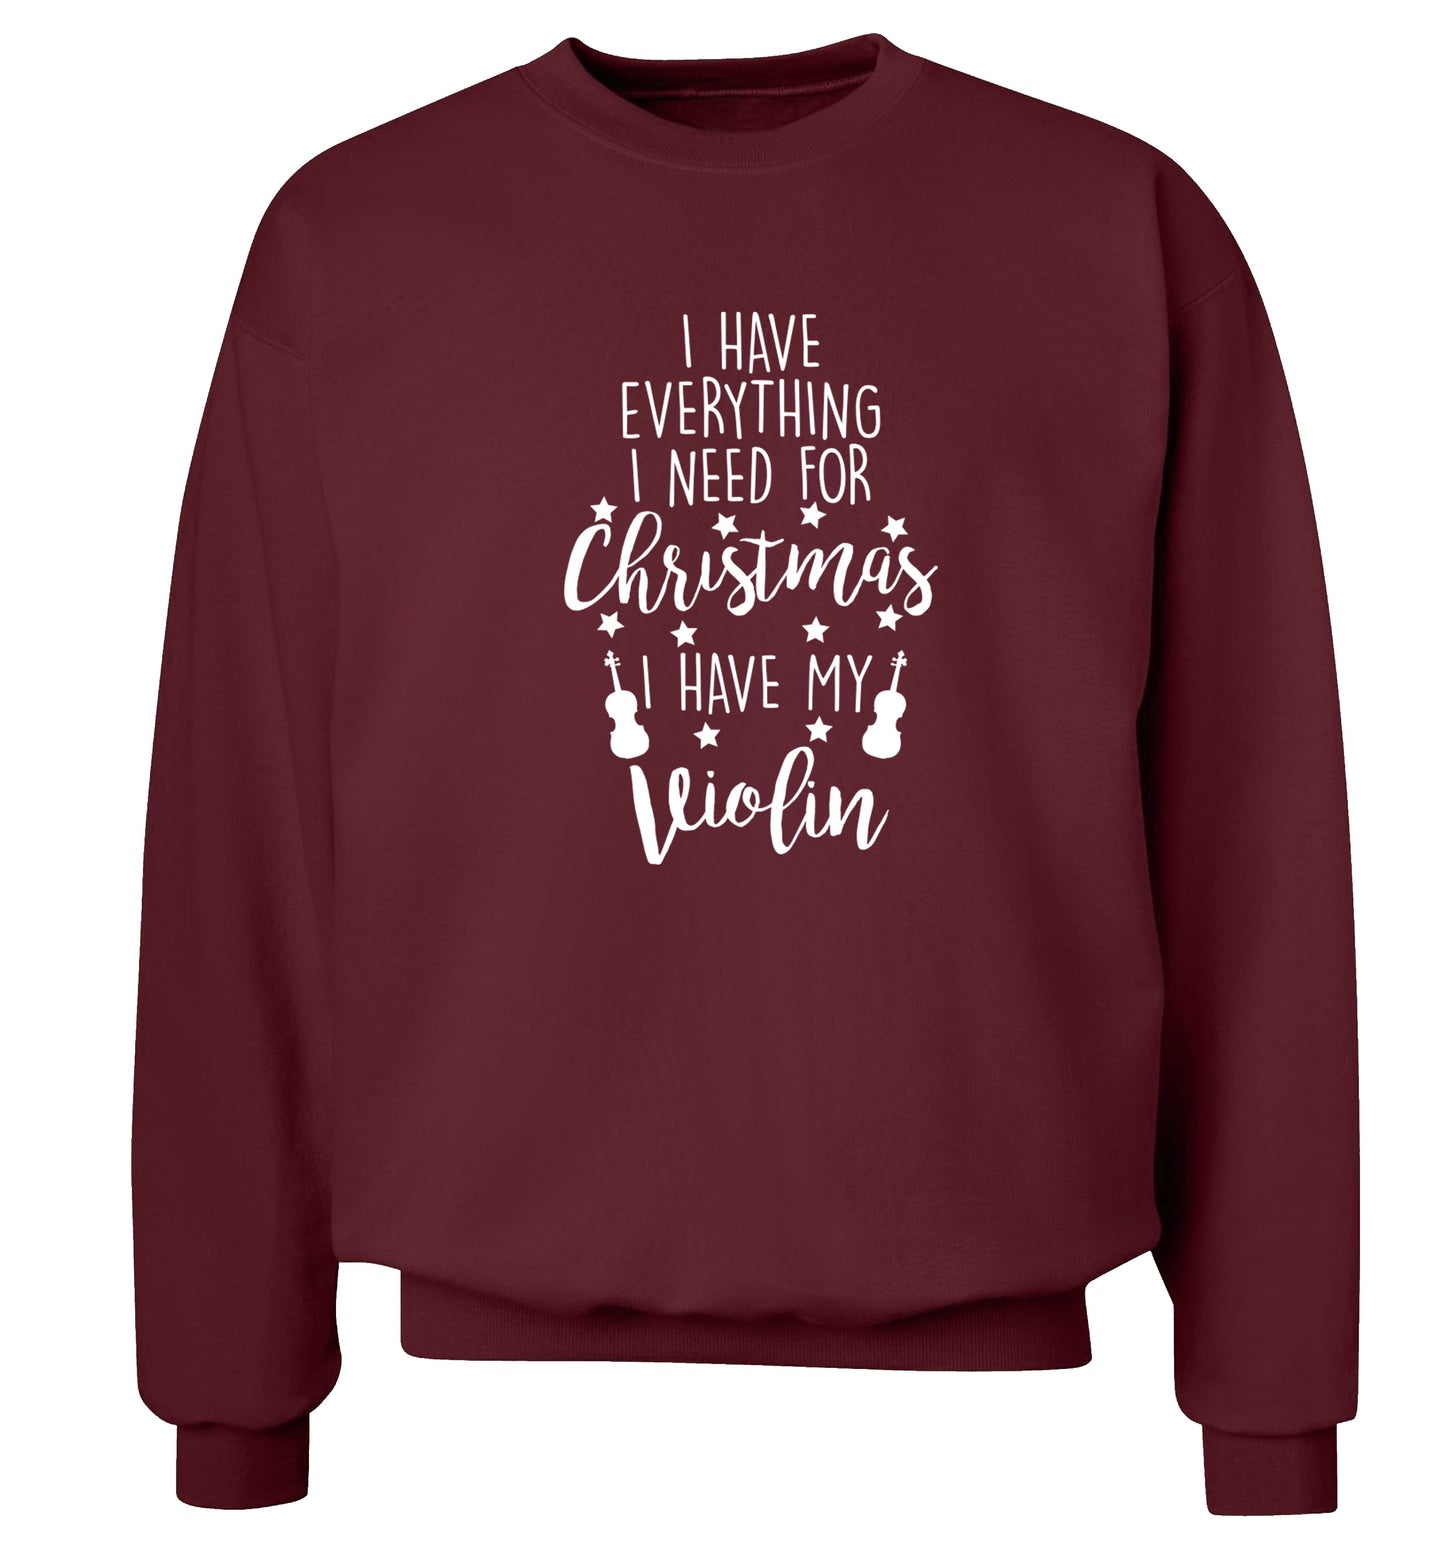 I have everything I need for Christmas I have my violin Adult's unisex maroon Sweater 2XL